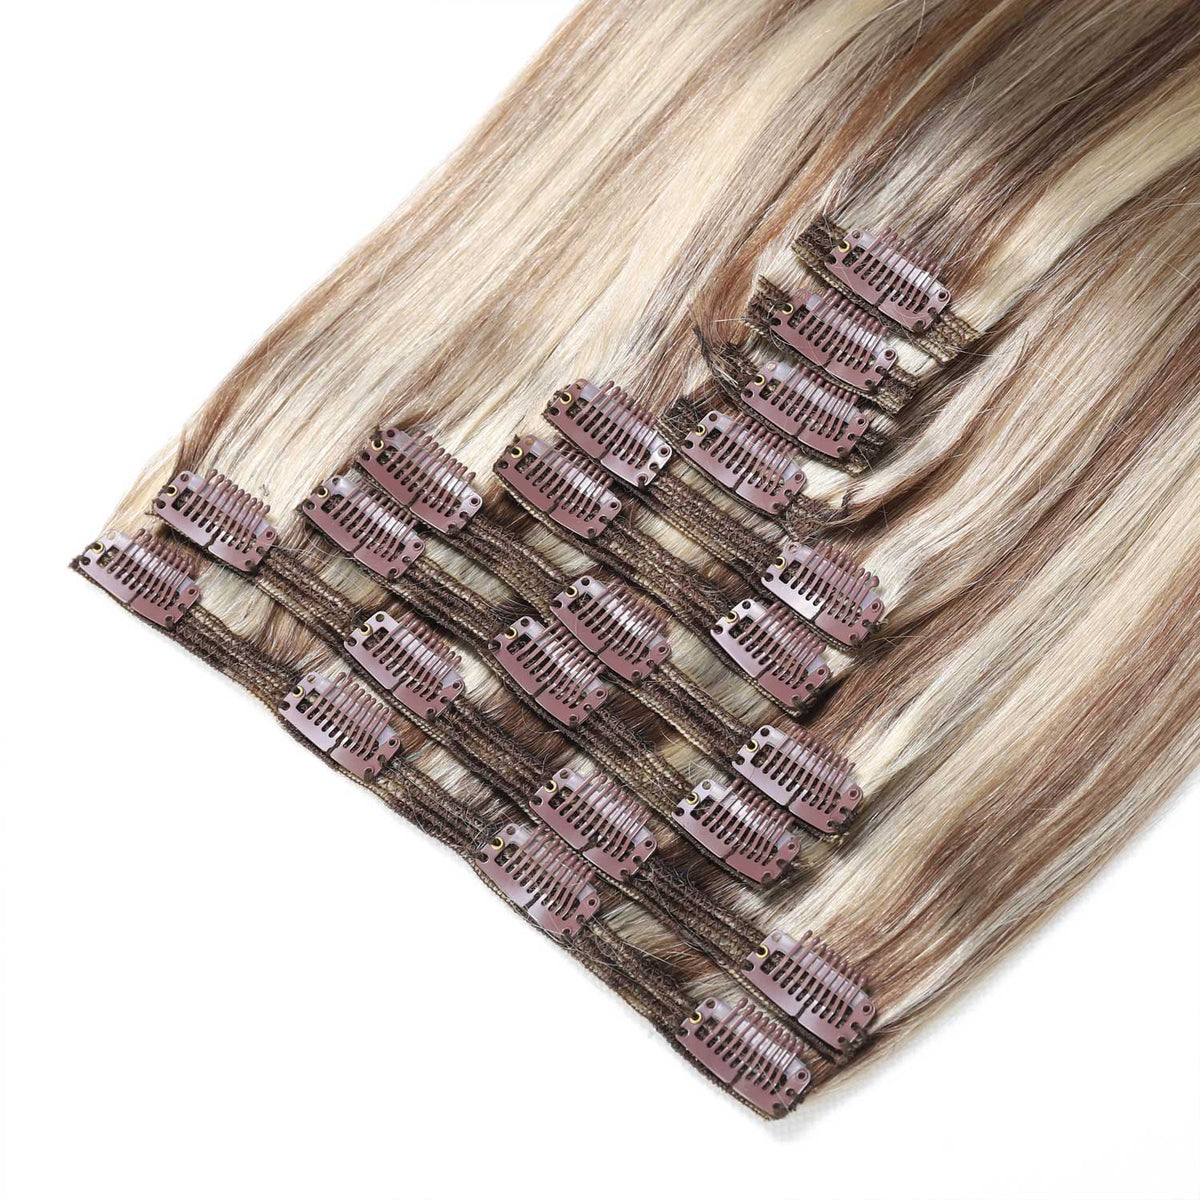 Clip In Hair Extensions #6/60 Medium Brown and Platinum Blonde Mix 17"